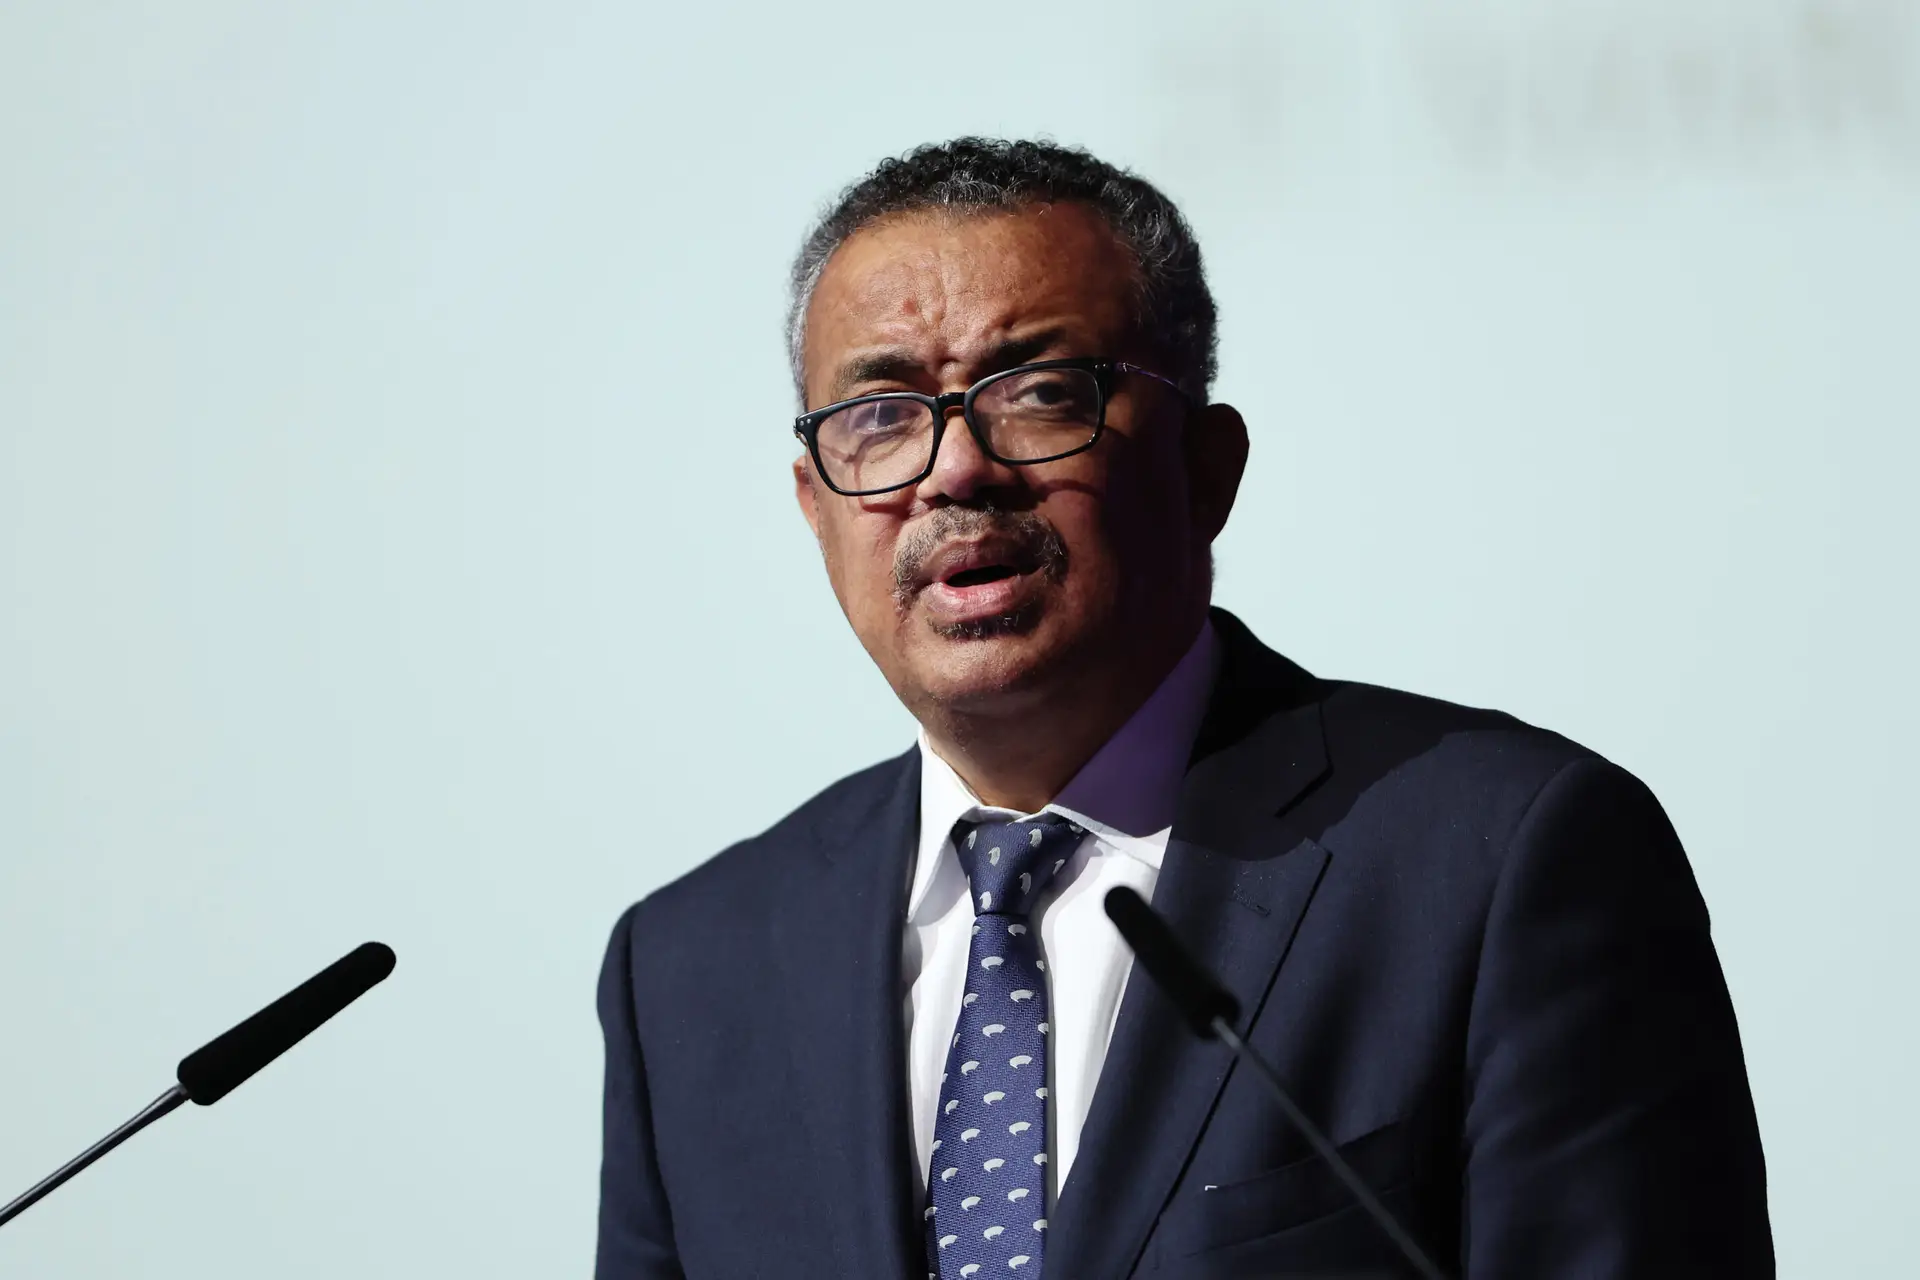 DOHA, QATAR – MARCH 31: Dr Tedros Adhanom Ghebreyesus, World Health Organization Director-General talks during the 72nd FIFA Congress at the Doha Exhibition and Convention Center on March 31, 2022 in Doha, Qatar. (Photo by Alexander Hassenstein – FIFA/FIFA via Getty Images)